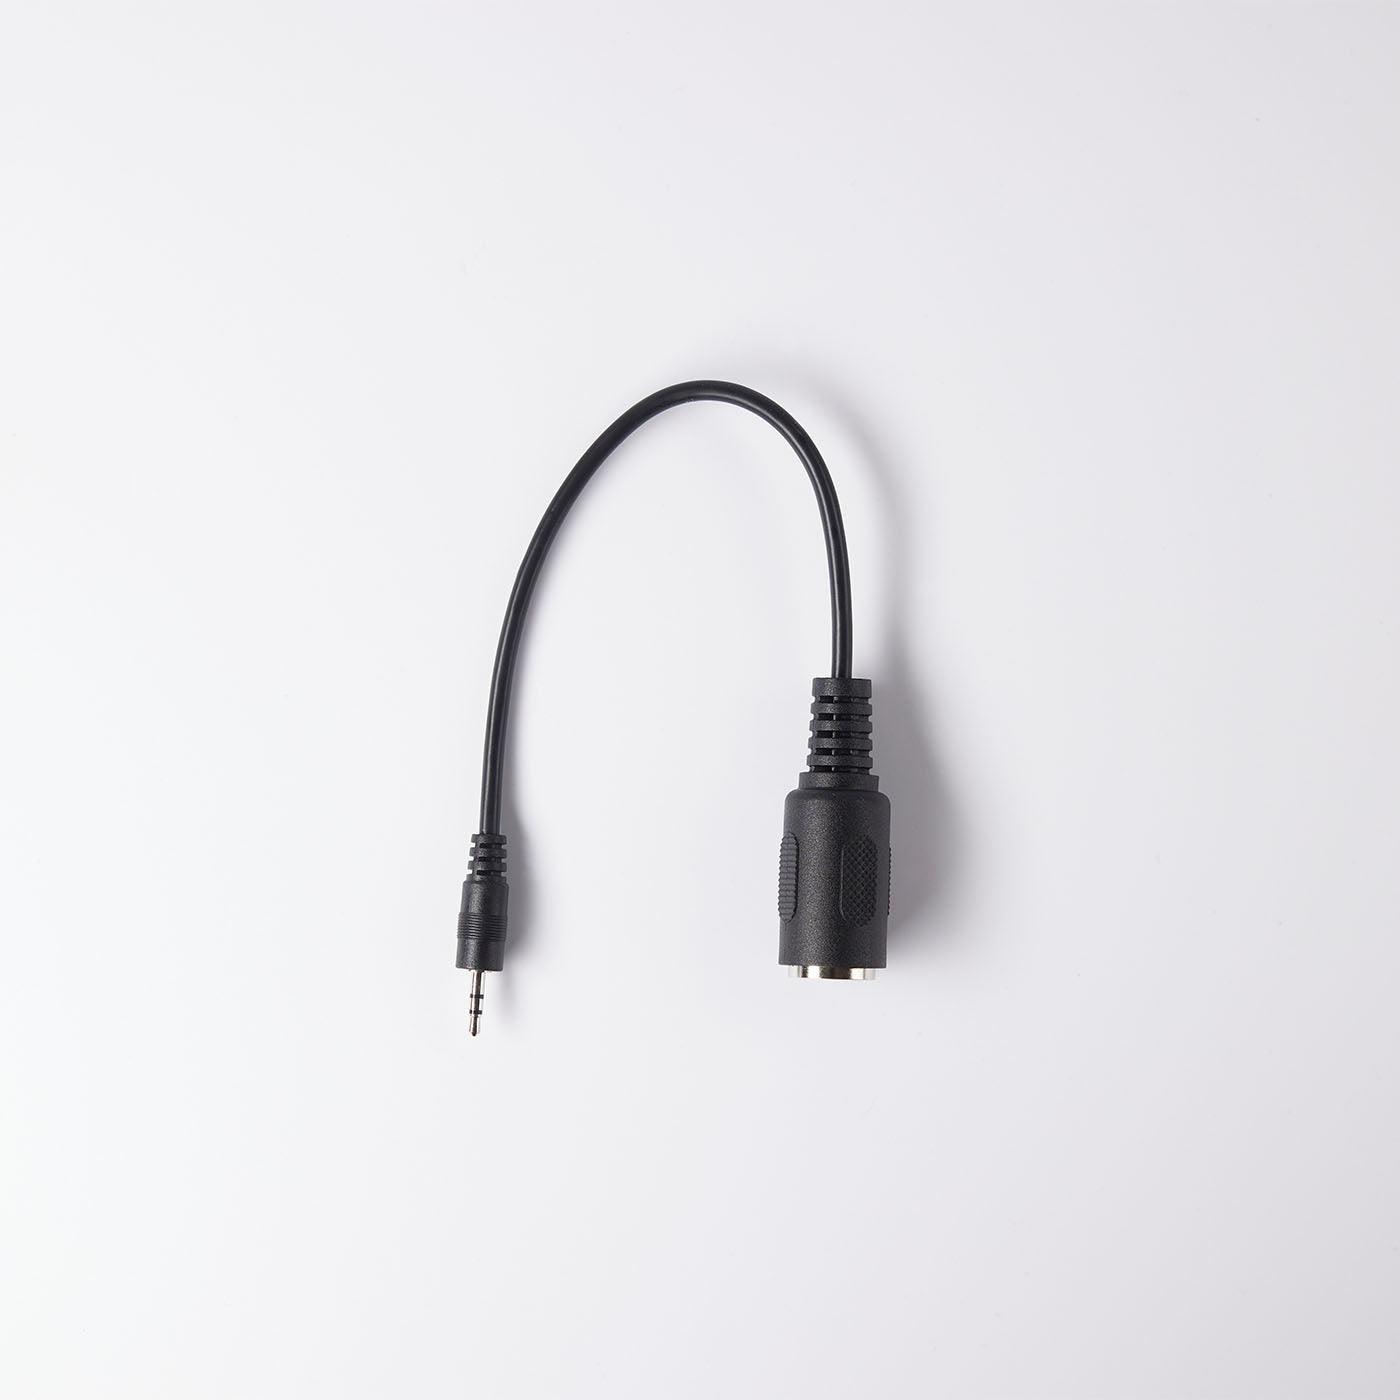 MIDI Adapter Breakout Cable - 2.5mm TRS to 5-pin DIN Female - Neunaber Audio